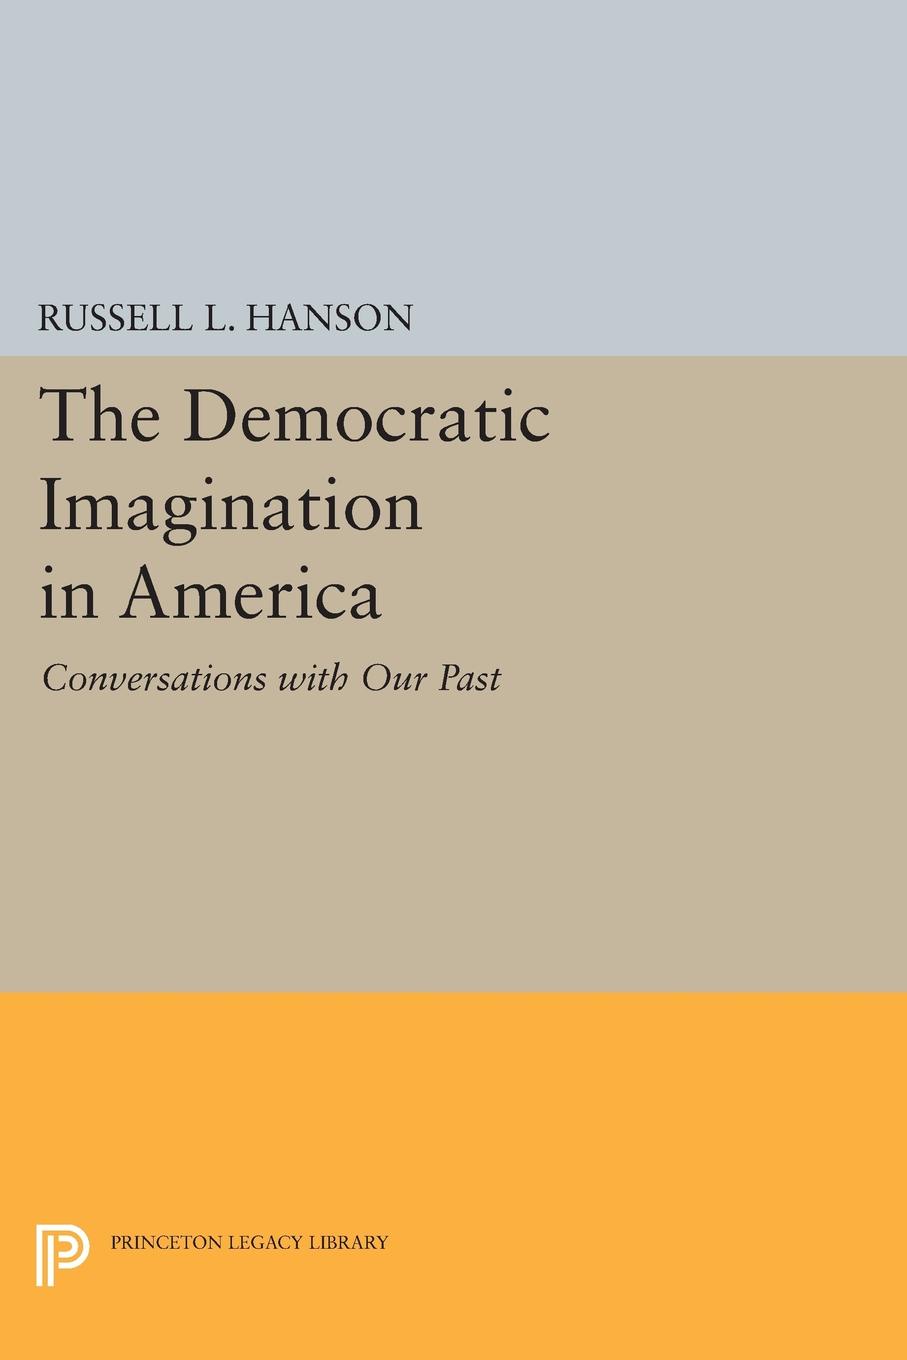 The Democratic Imagination in America. Conversations with Our Past